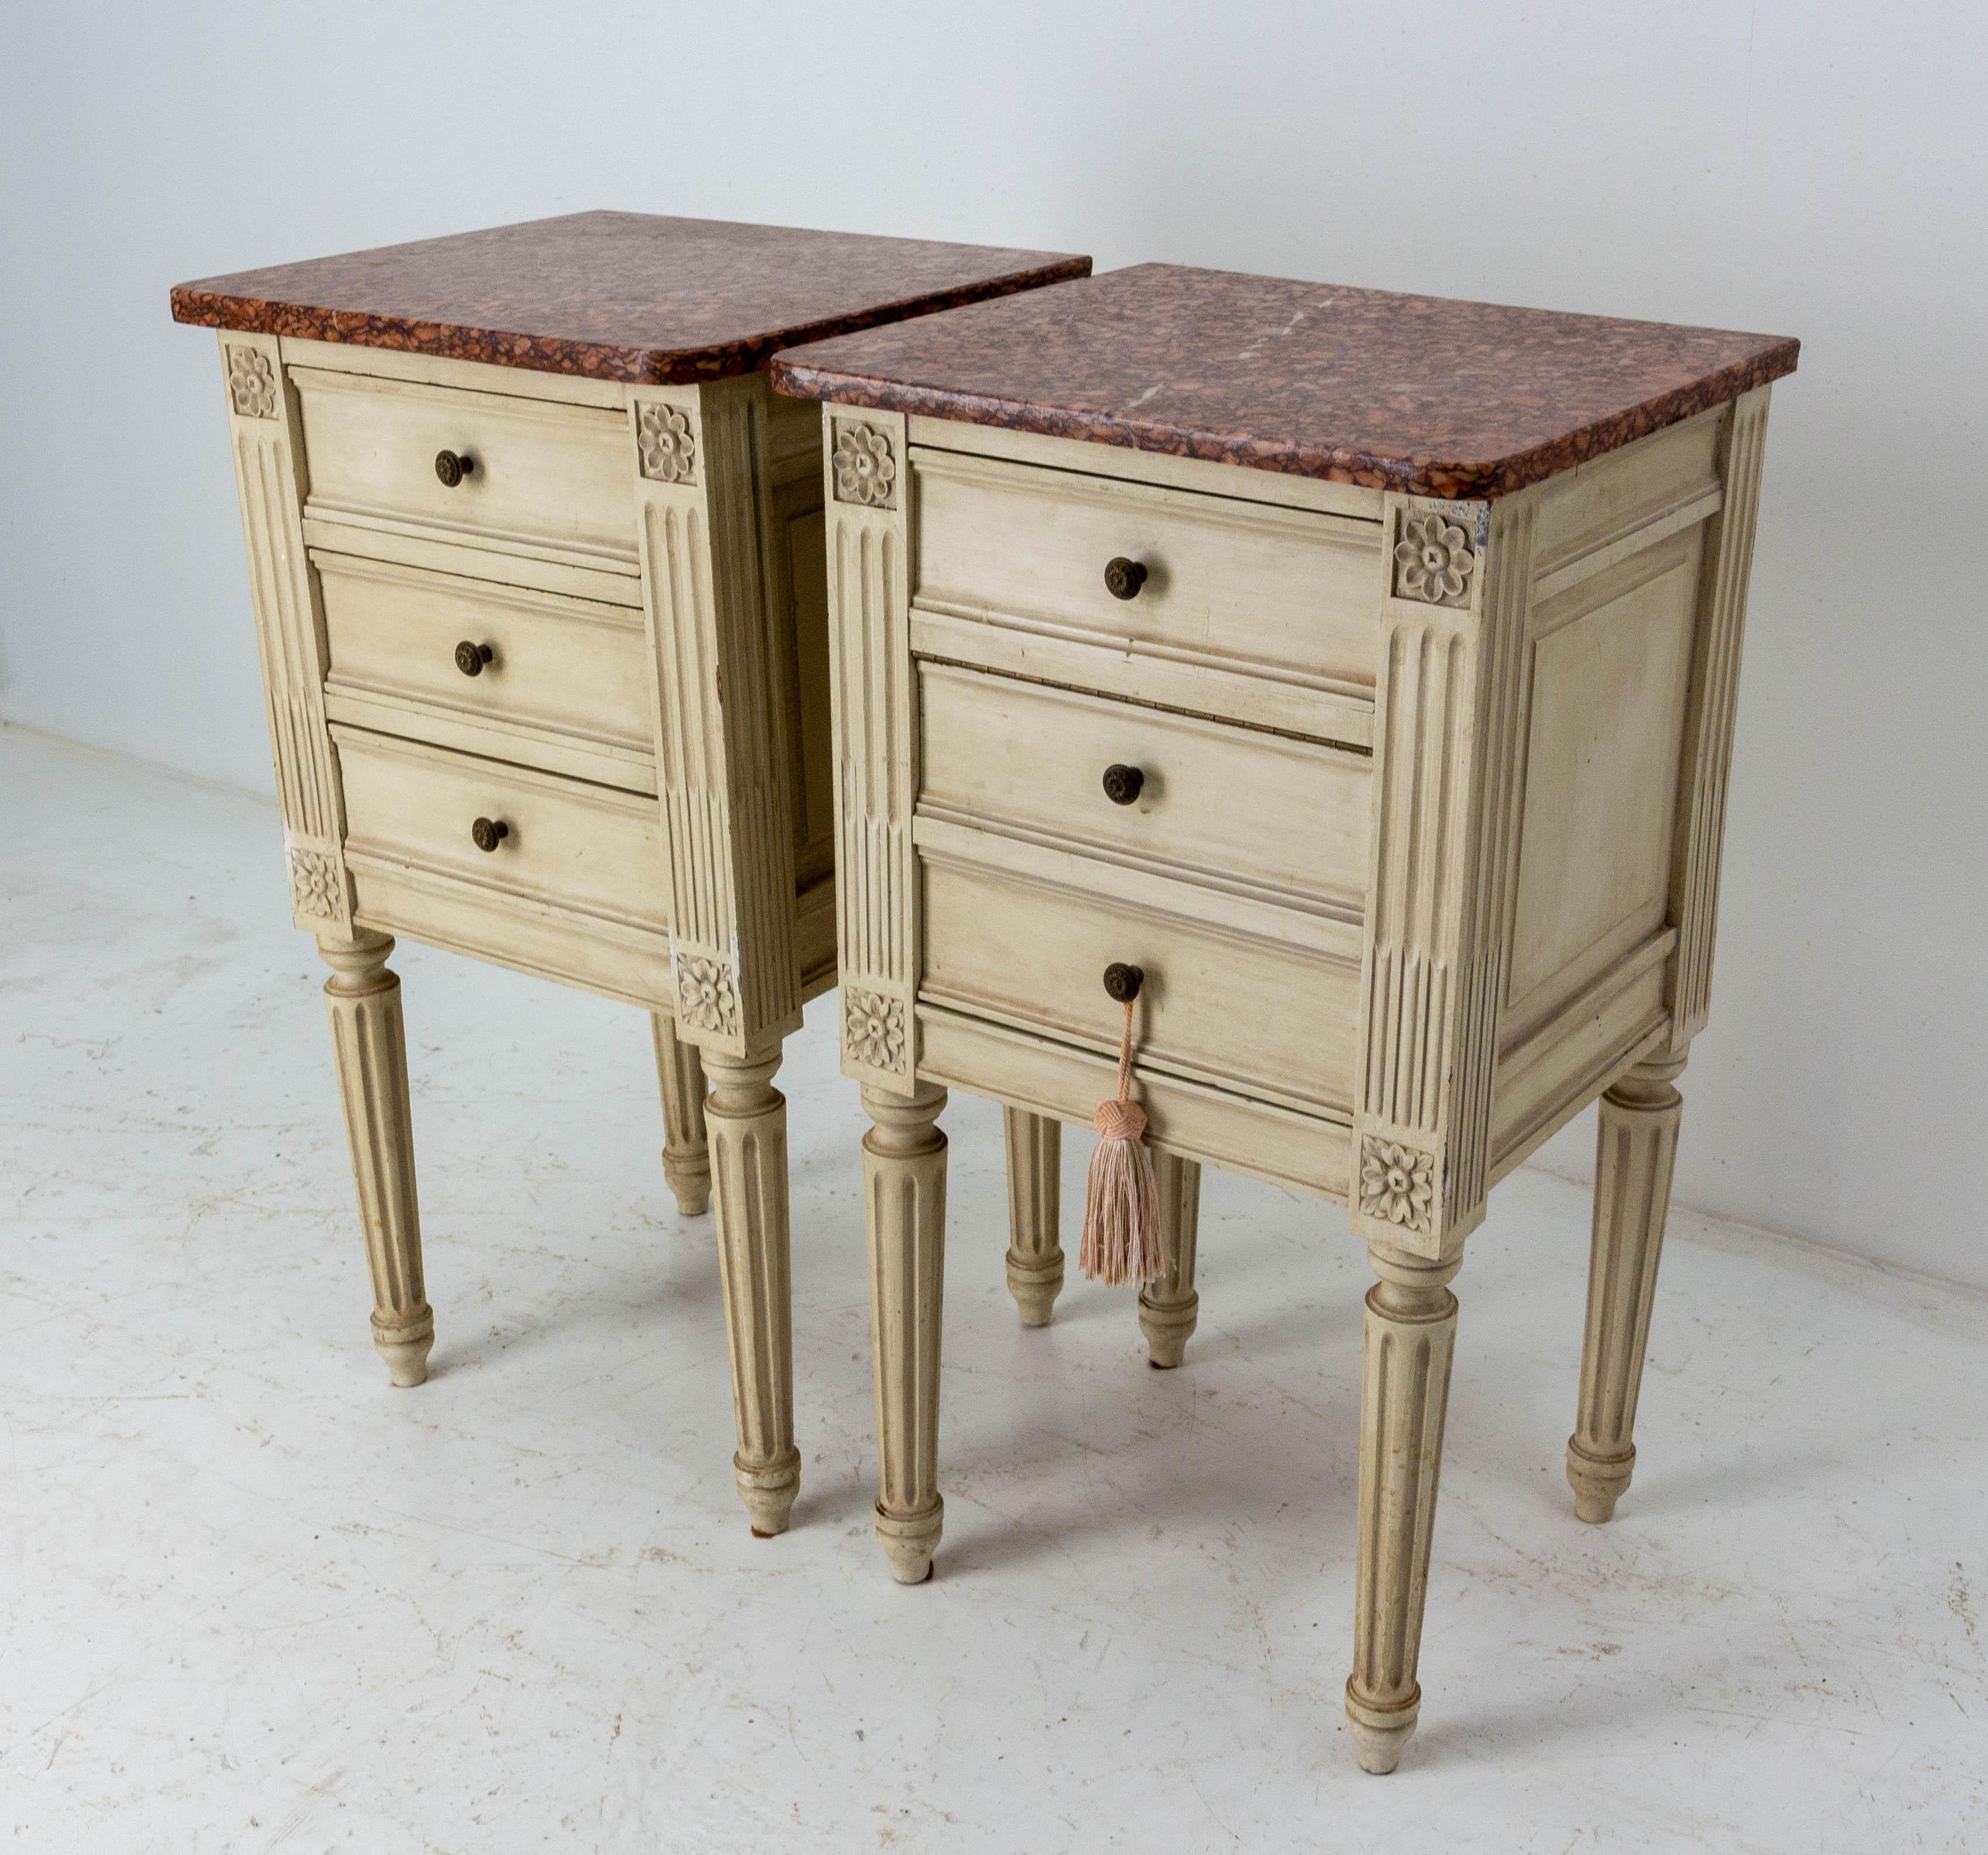 French side cabinets nightstand bedside tables in the Louis XVI style with marble tops
Midcentury 1960
Patinated
The two nightstands are different: one has one drawer and a cabinet, the other has three drawers.
Good condition
If you like them,